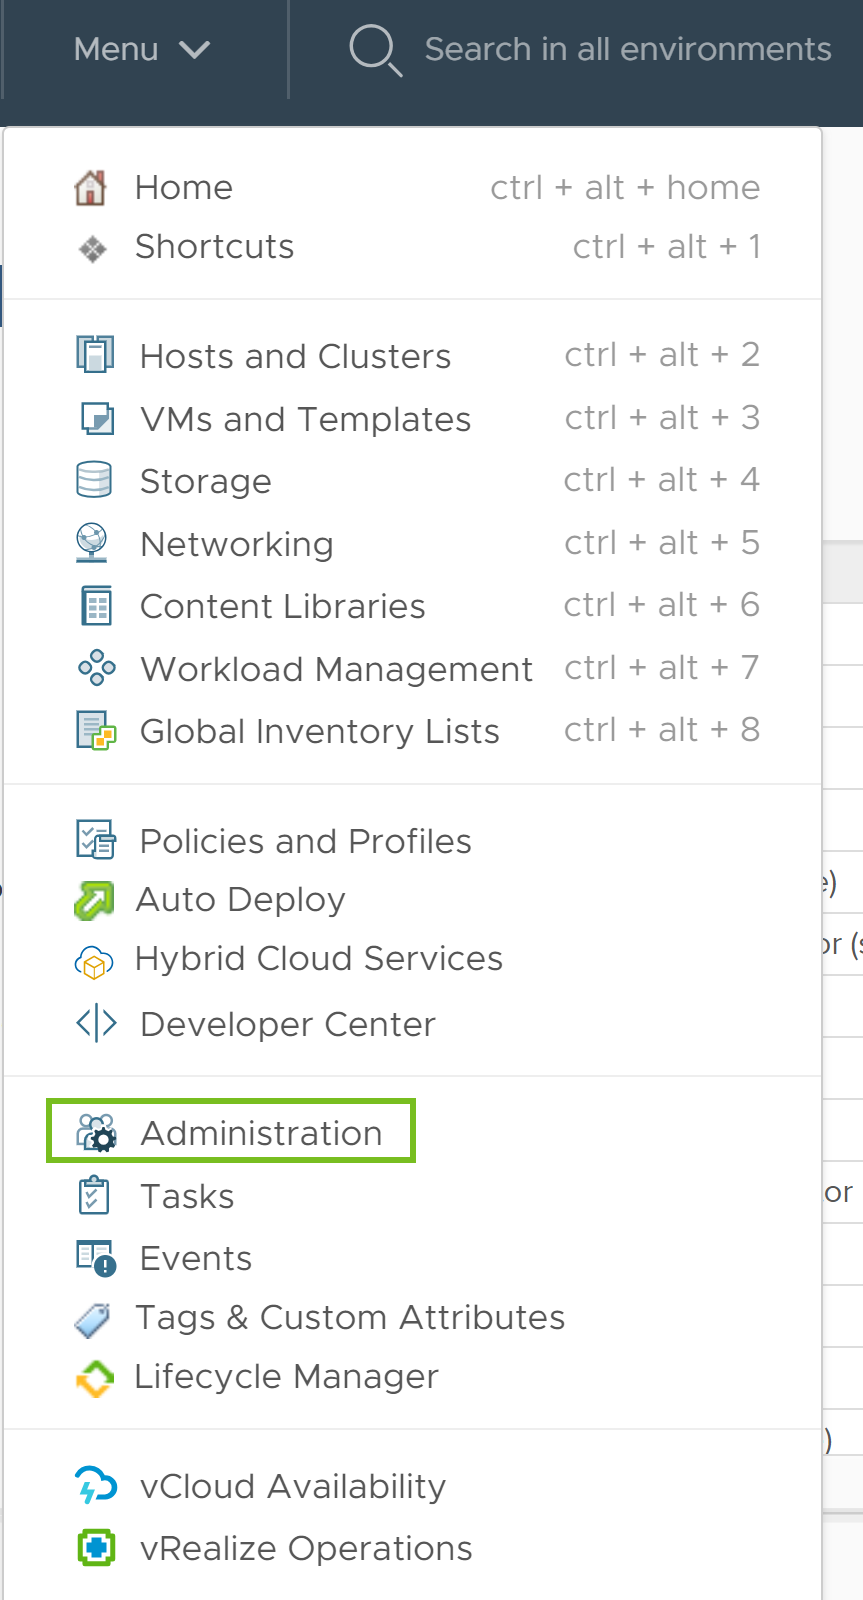 The screenshot shows the how to navigate to Administration in vSphere Web client.